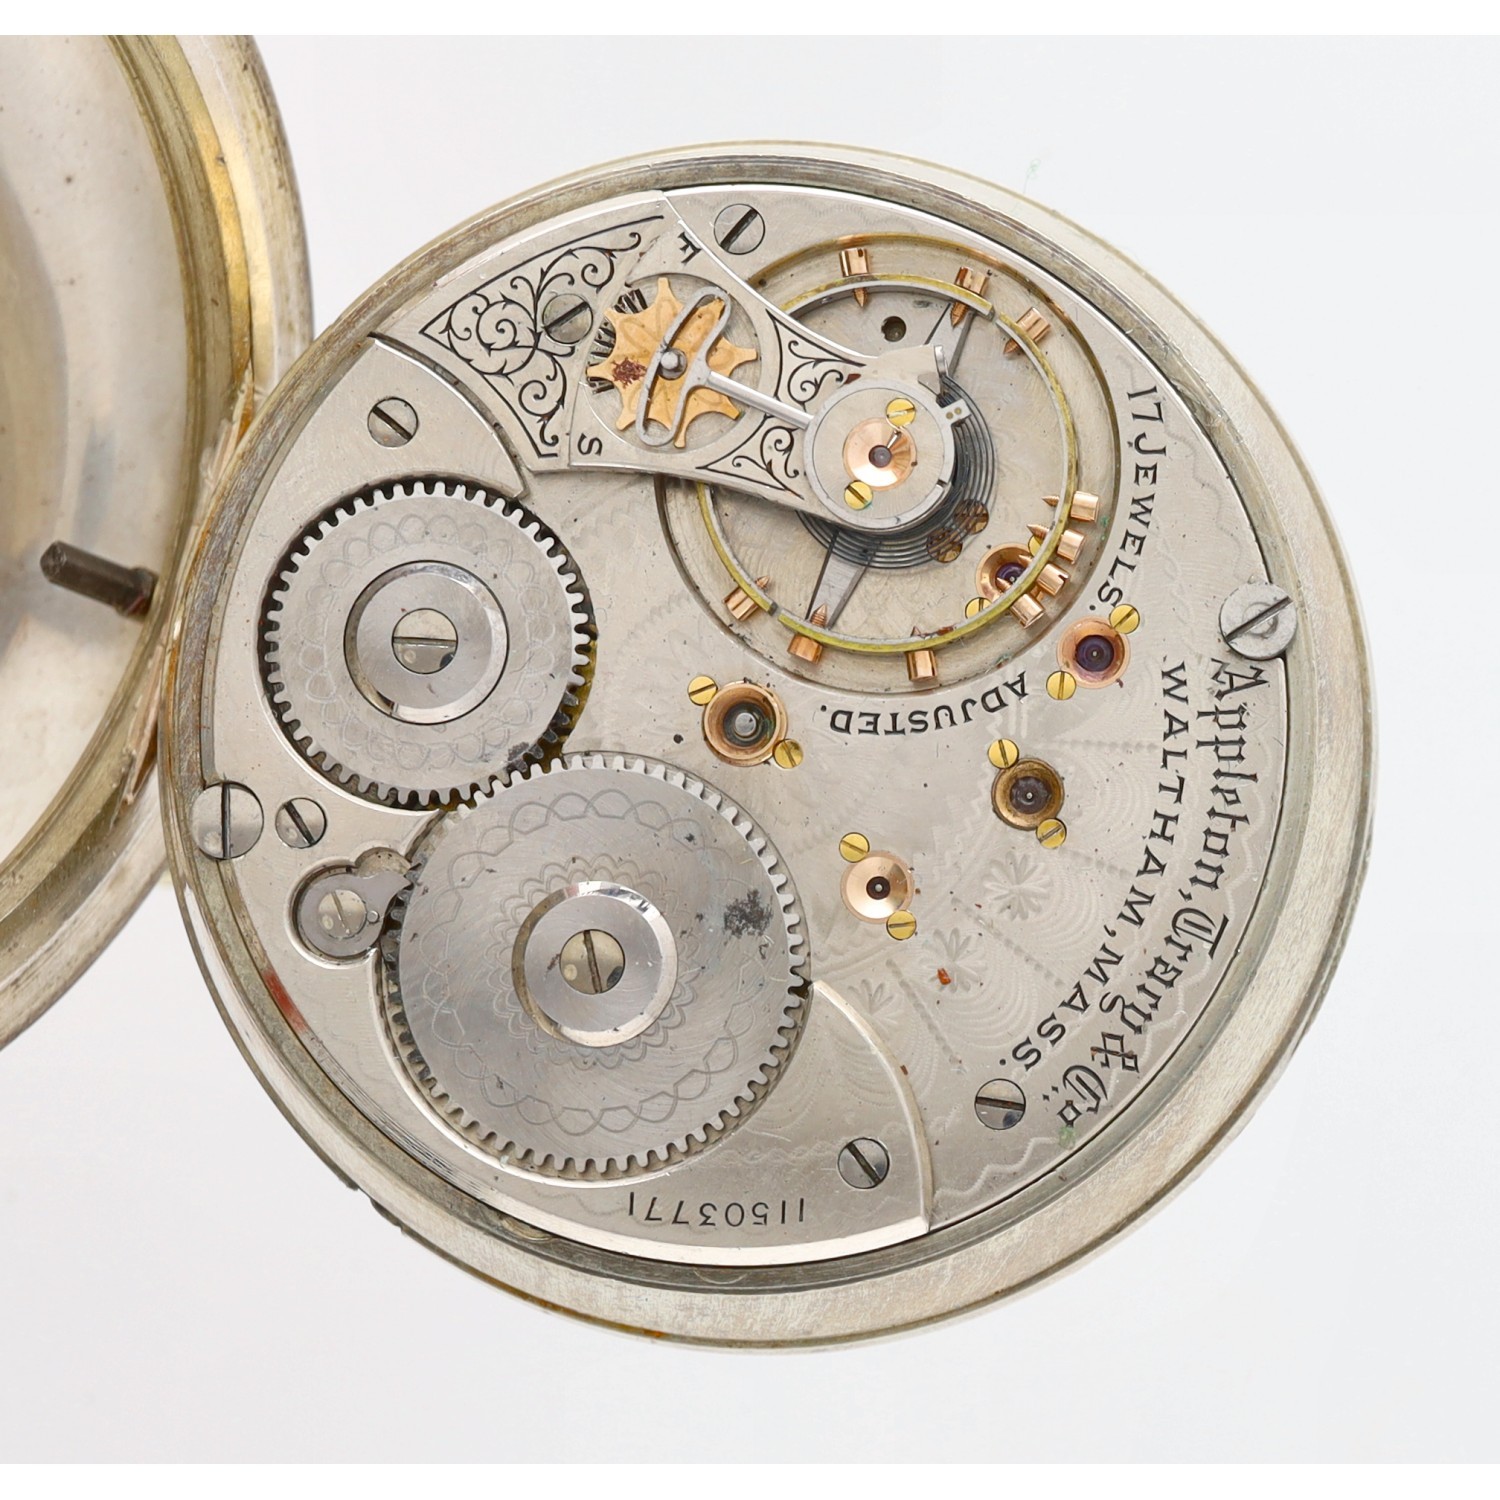 American Waltham 'Appleton Tracy & Co.' lever set pocket watch, circa 1902, serial no. 11503771, - Image 3 of 4